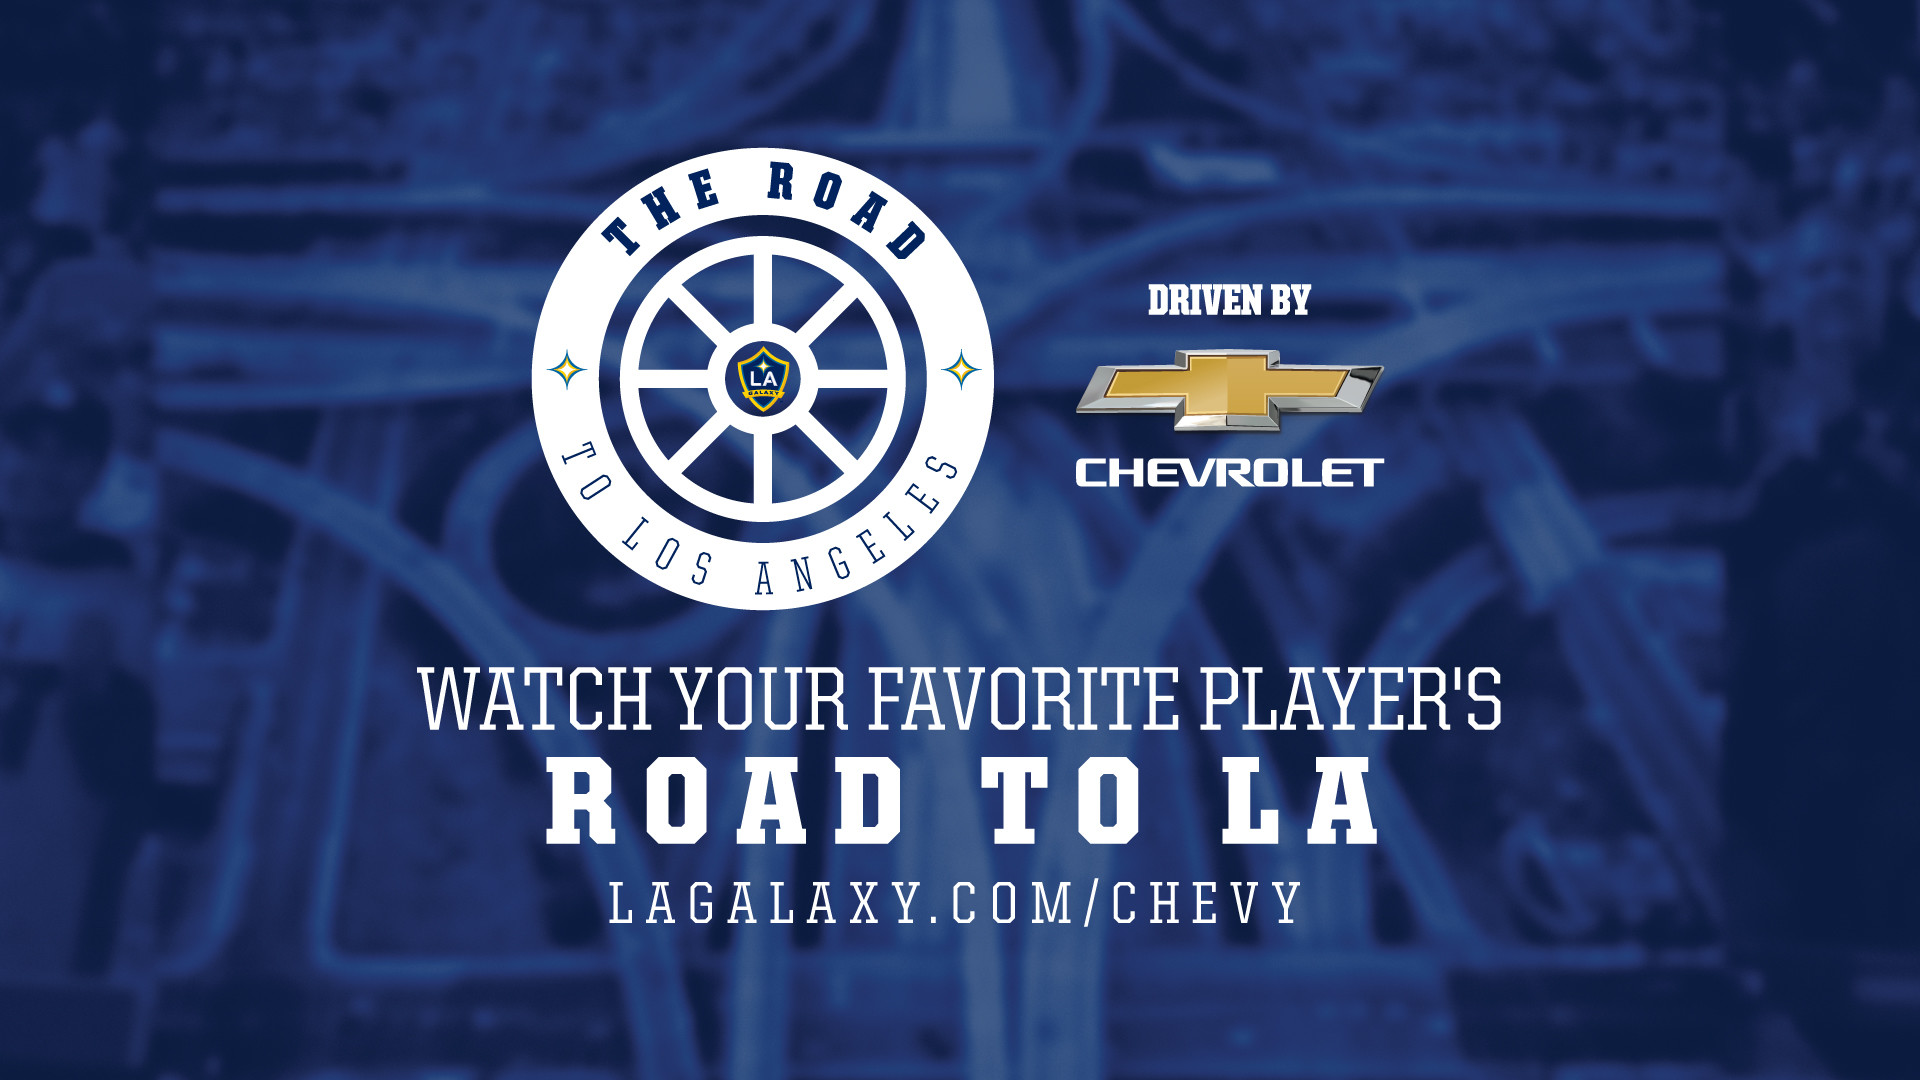 1920x1080 The LA Galaxy have unveiled a multi-part docuseries called The Road to LA  Driven by Chevrolet, which will highlight numerous players' unique personal  paths, ...